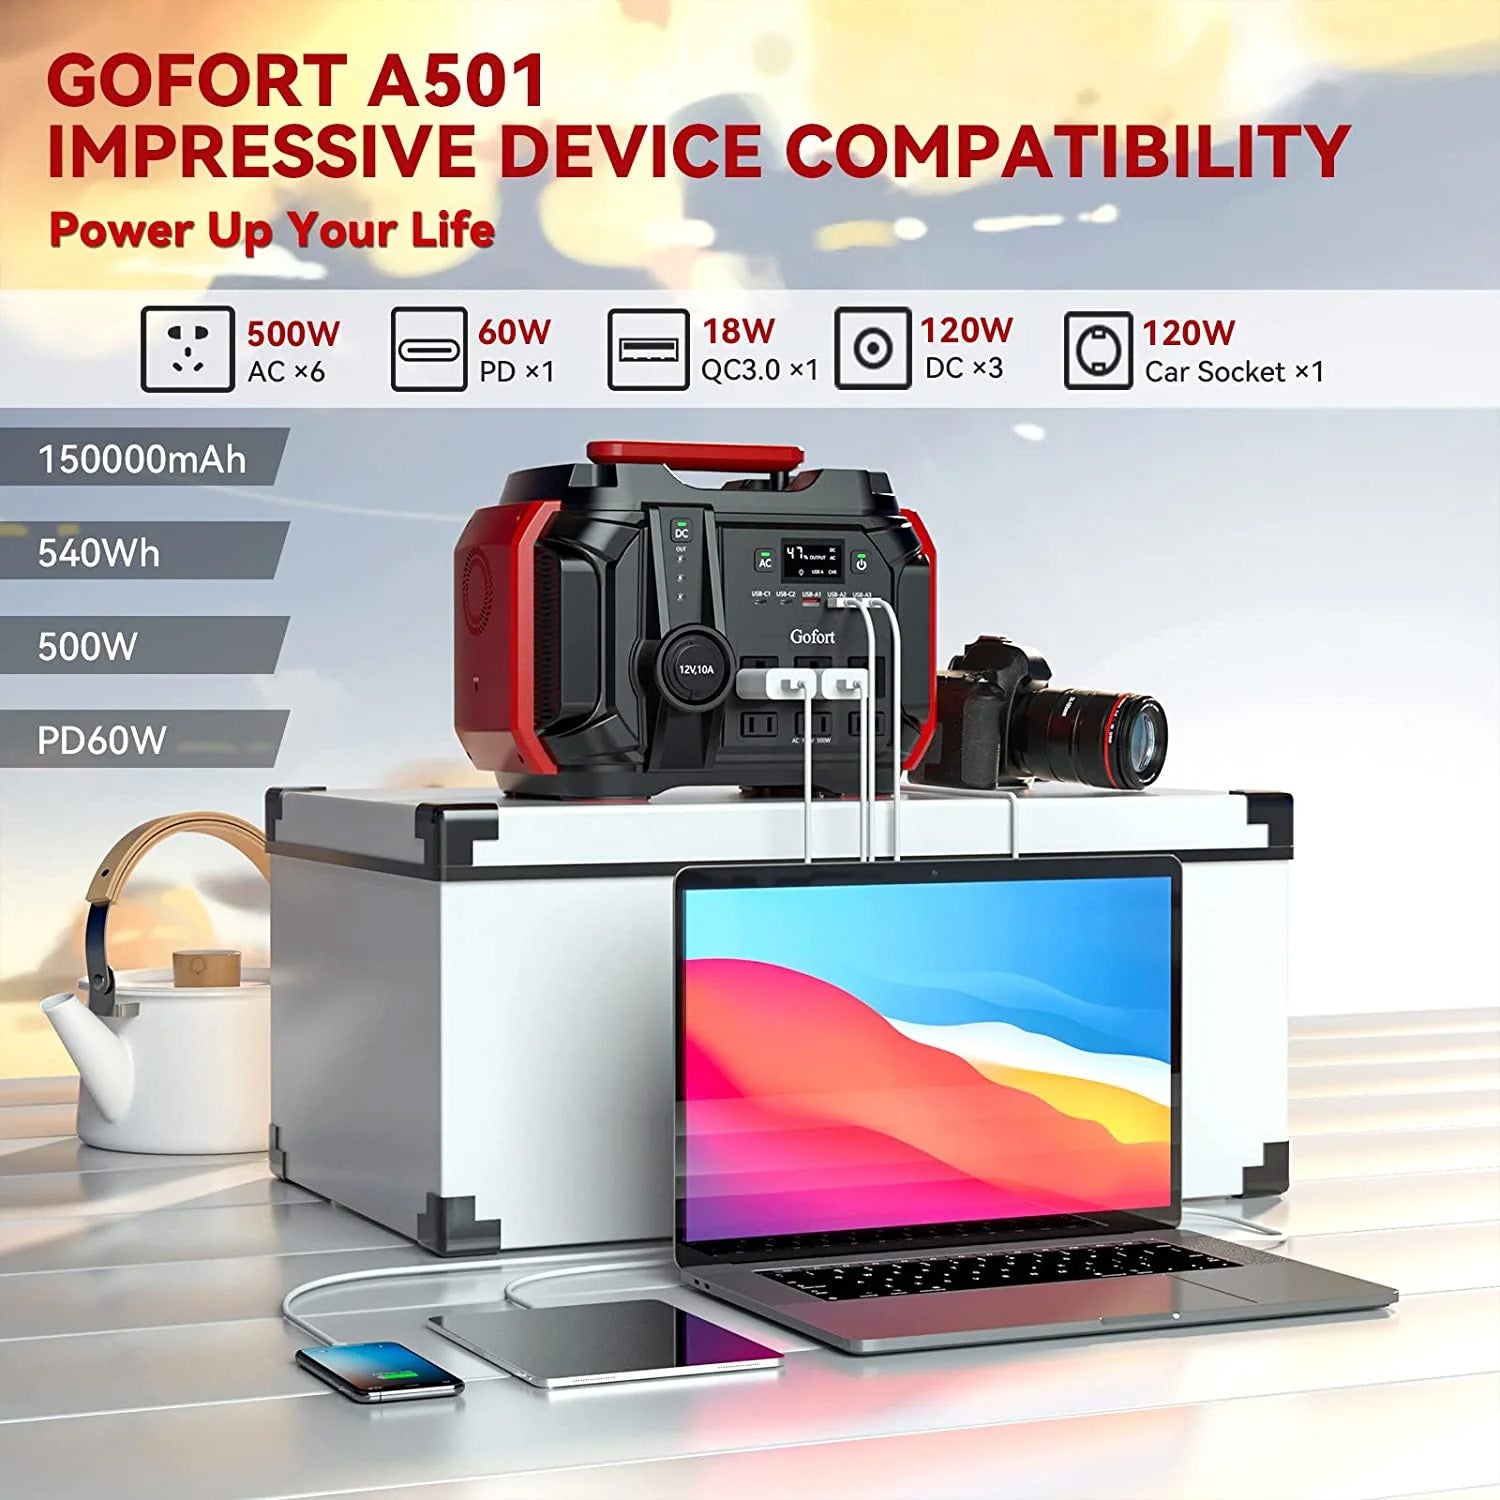 The Gofort A501 Has An Impressive Device Compatibility